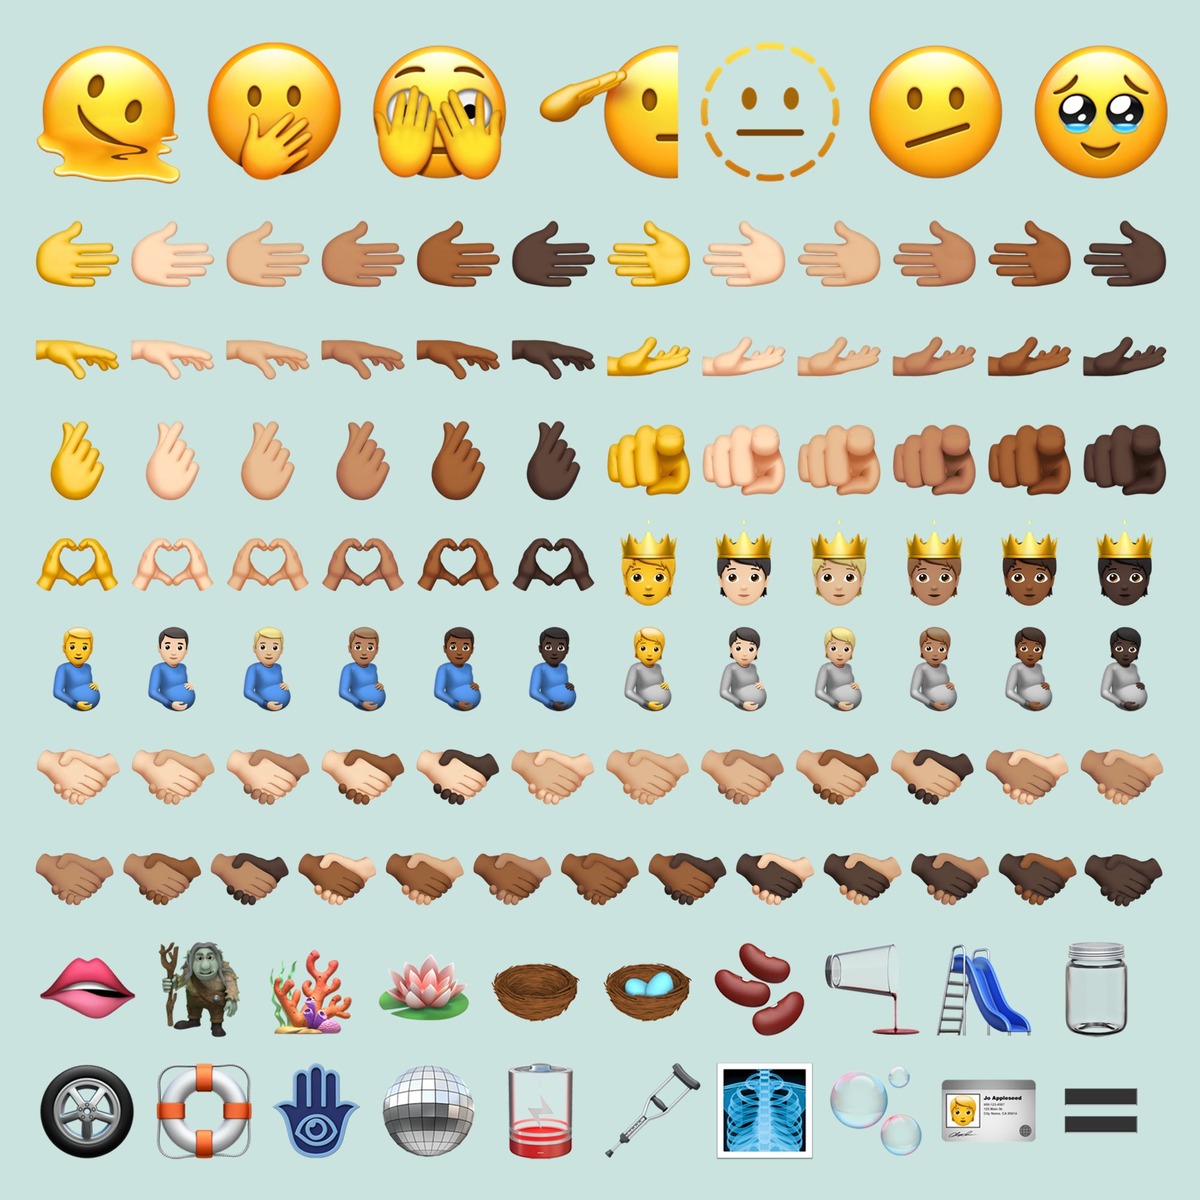 all-the-new-emojis-2022